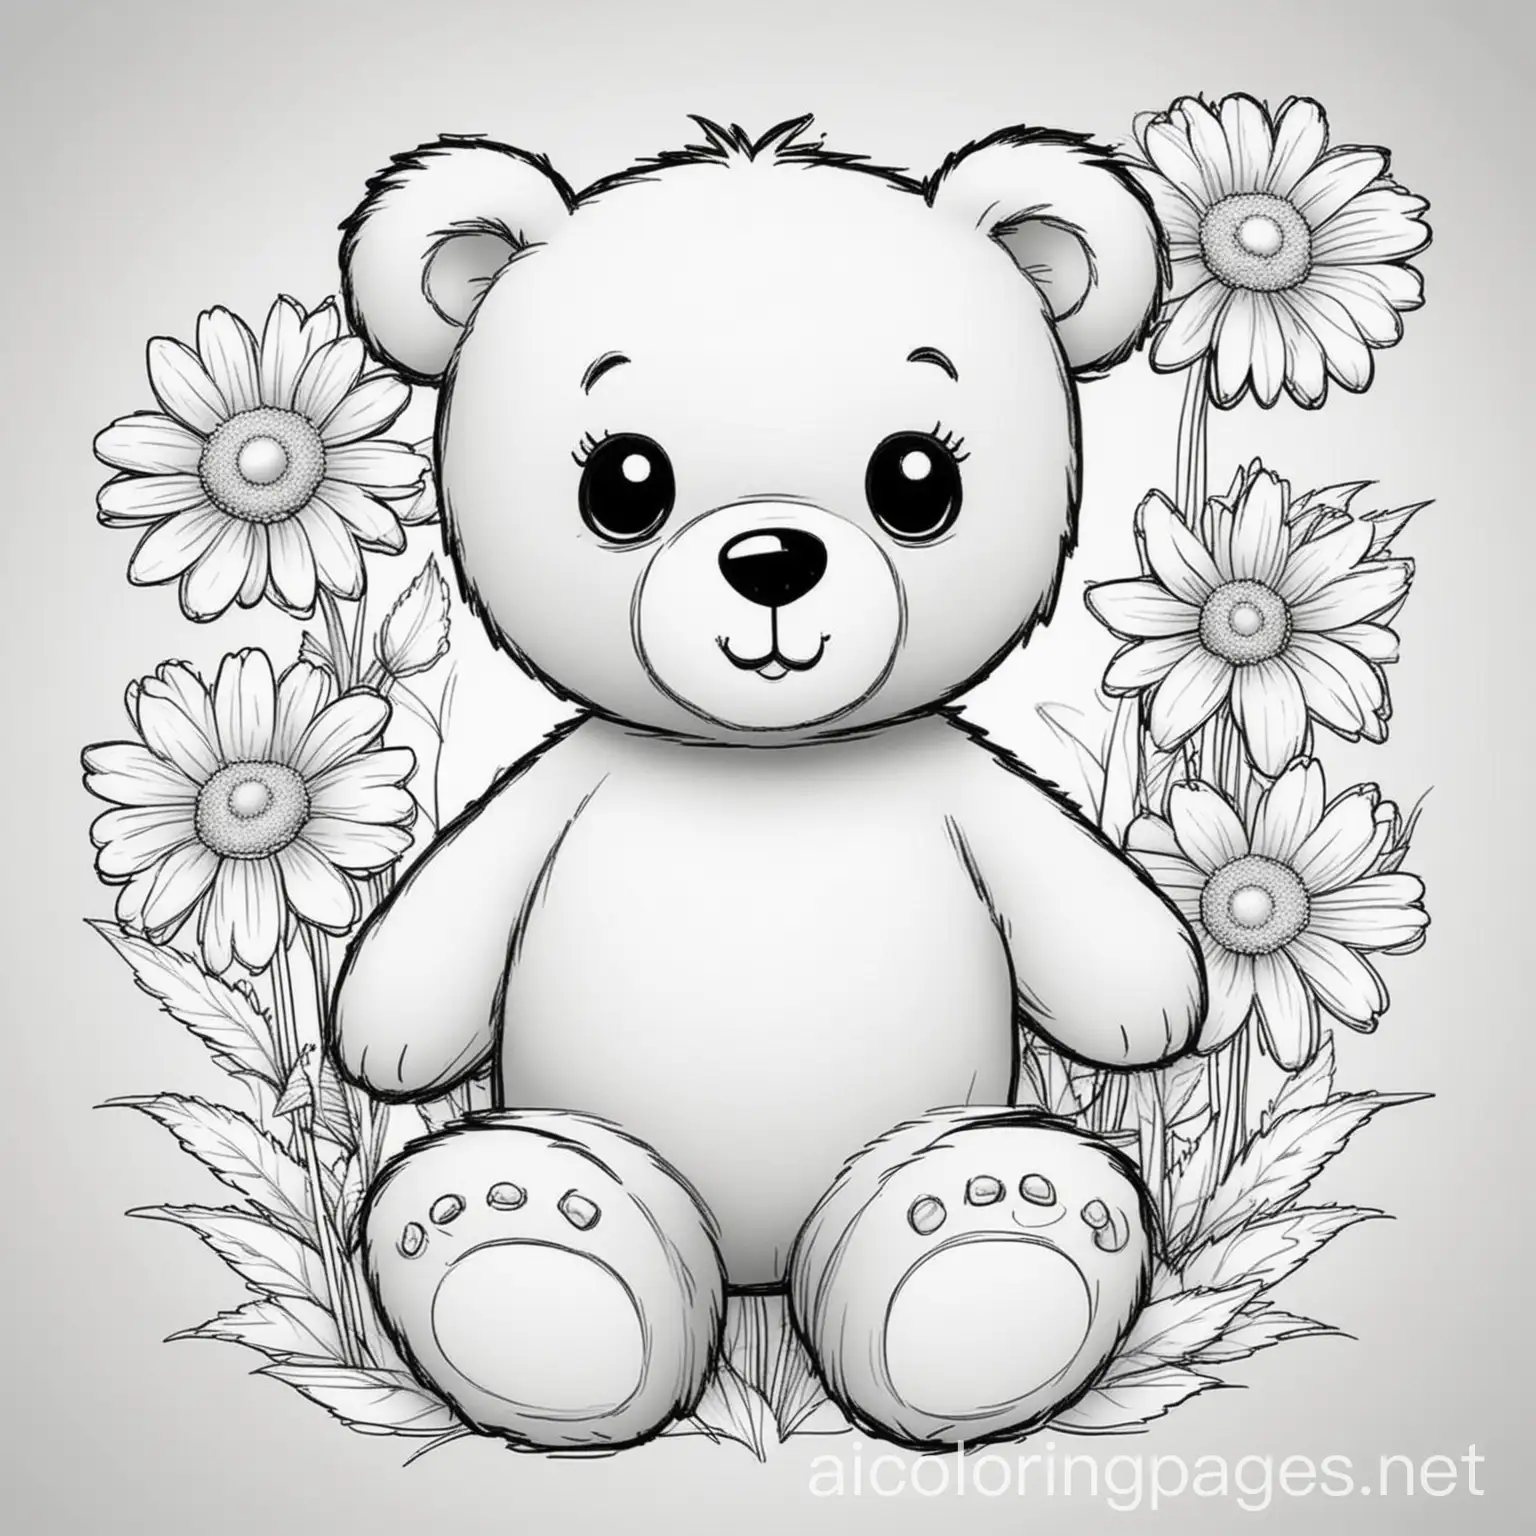 adorable teddy bear childrens coloring page with daisies cartoon style clean lines, Coloring Page, black and white, line art, white background, Simplicity, Ample White Space. The background of the coloring page is plain white to make it easy for young children to color within the lines. The outlines of all the subjects are easy to distinguish, making it simple for kids to color without too much difficulty